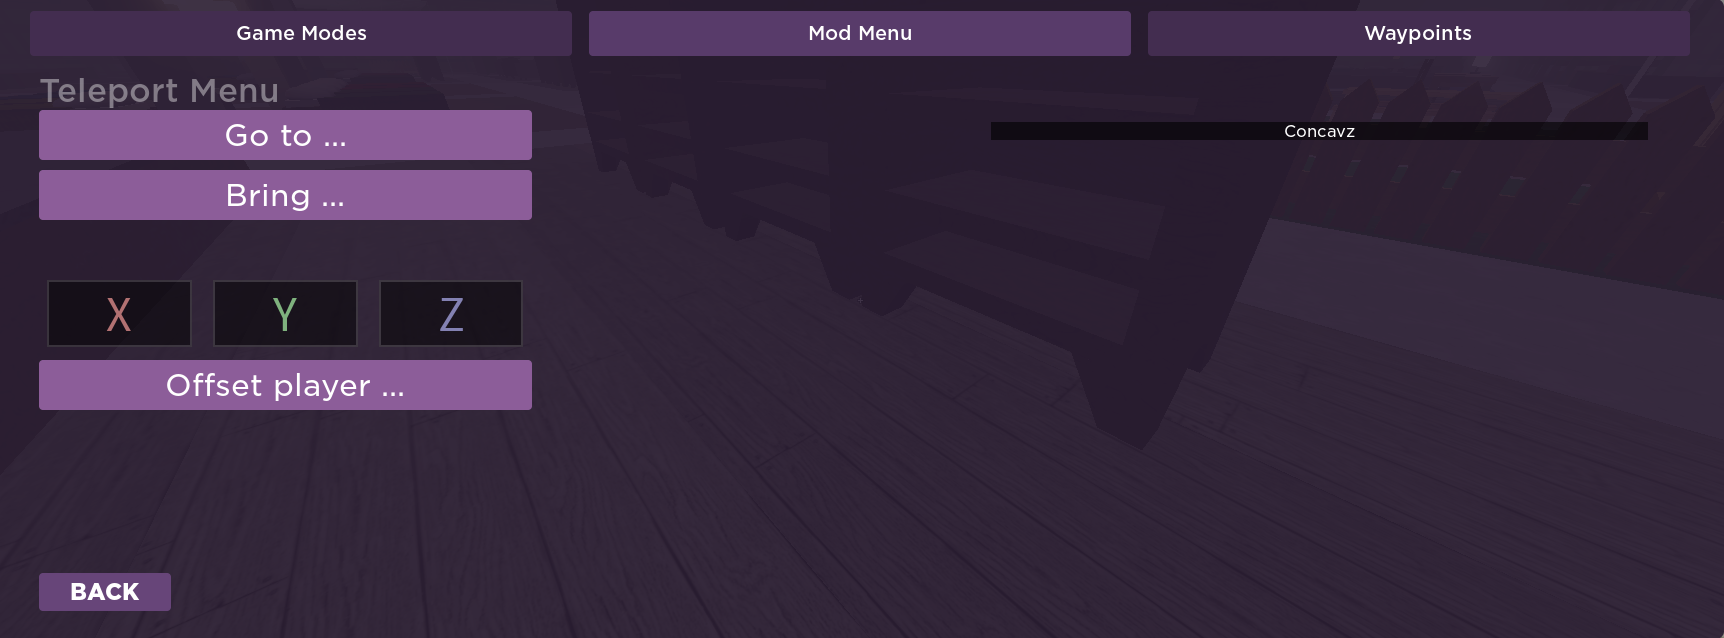 How to get a mod menu on Roblox (Mobile/PC) 